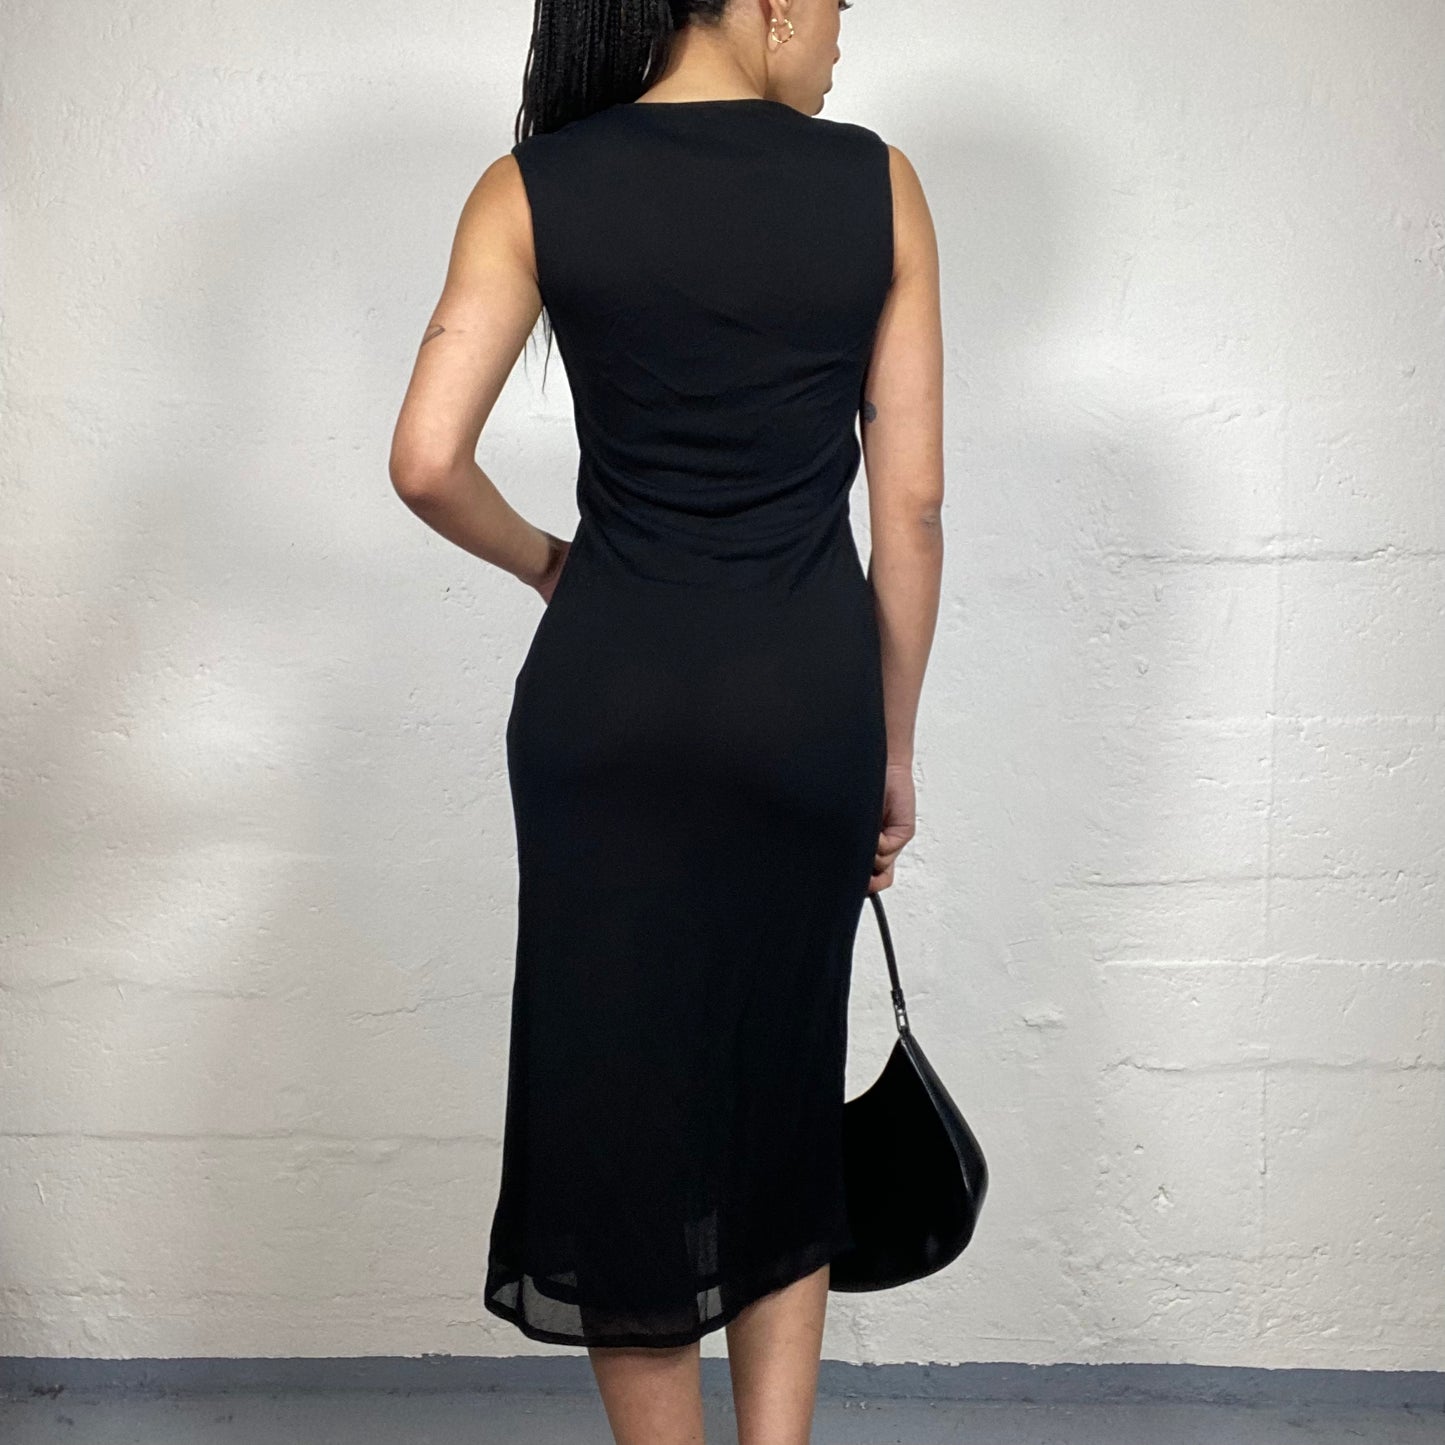 Vintage 2000's Archive Gucci Old Money Classy Black Slim Fit Midi Dress with Hanging Stripes Details (M)